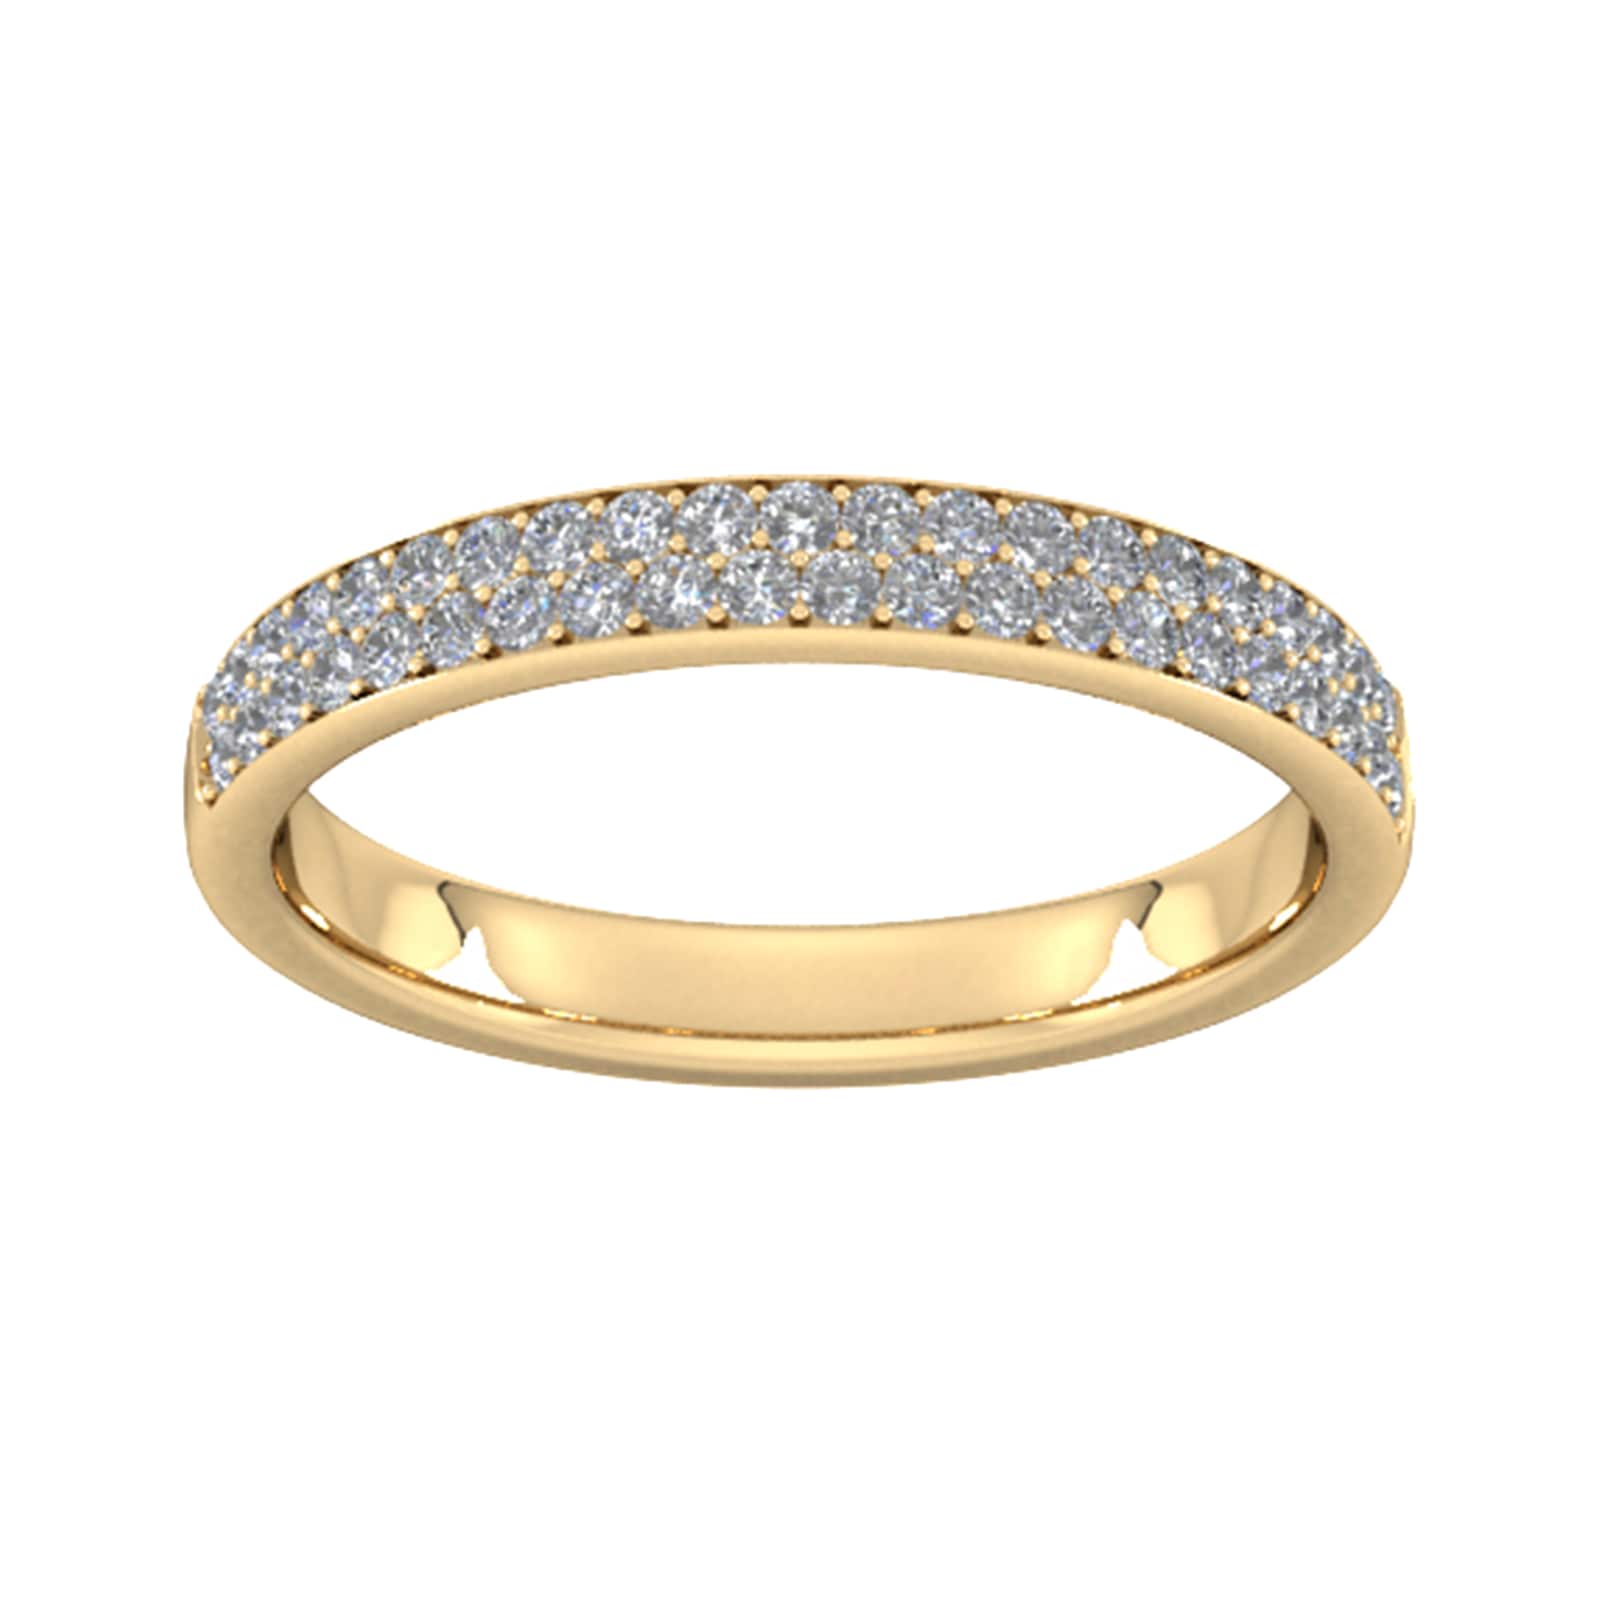 0.42 Carat Total Weight Brilliant Cut Double Row Grain Set Diamond Wedding Ring In 18 Carat Yellow Gold - Ring Size S